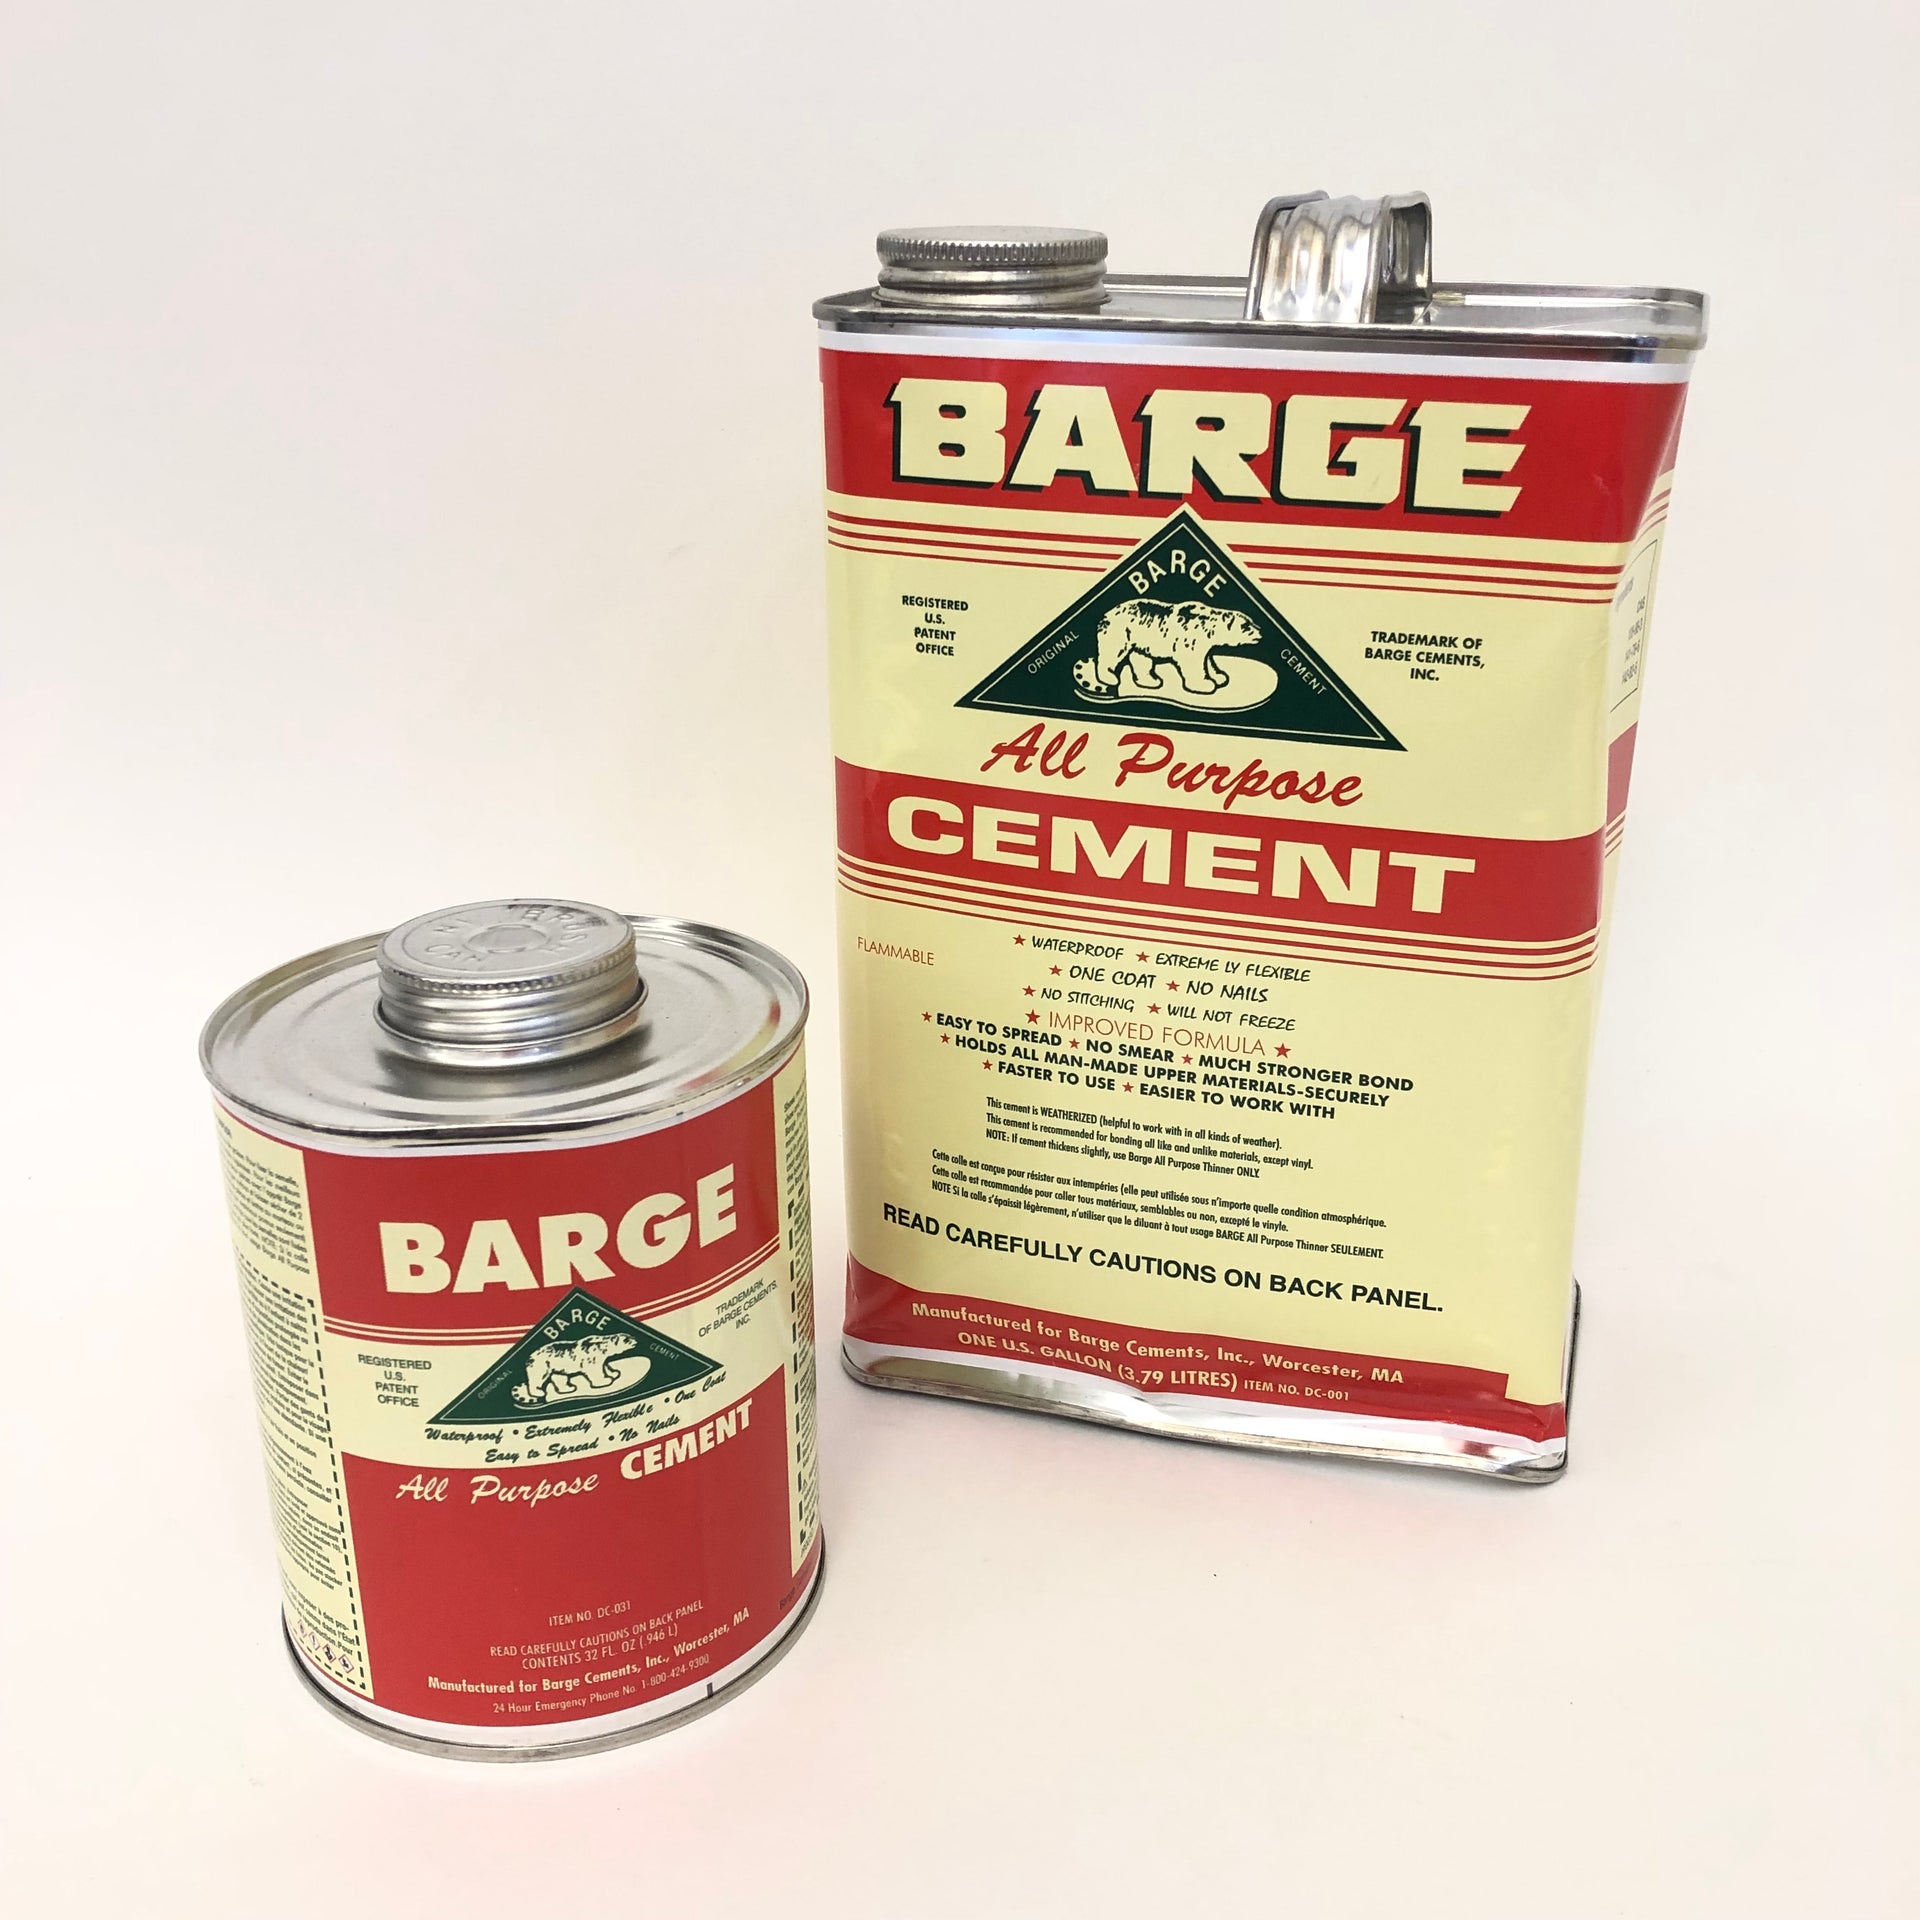 Barge All Purpose Cement 32 oz (Contact Cement Adhesive for Gluing